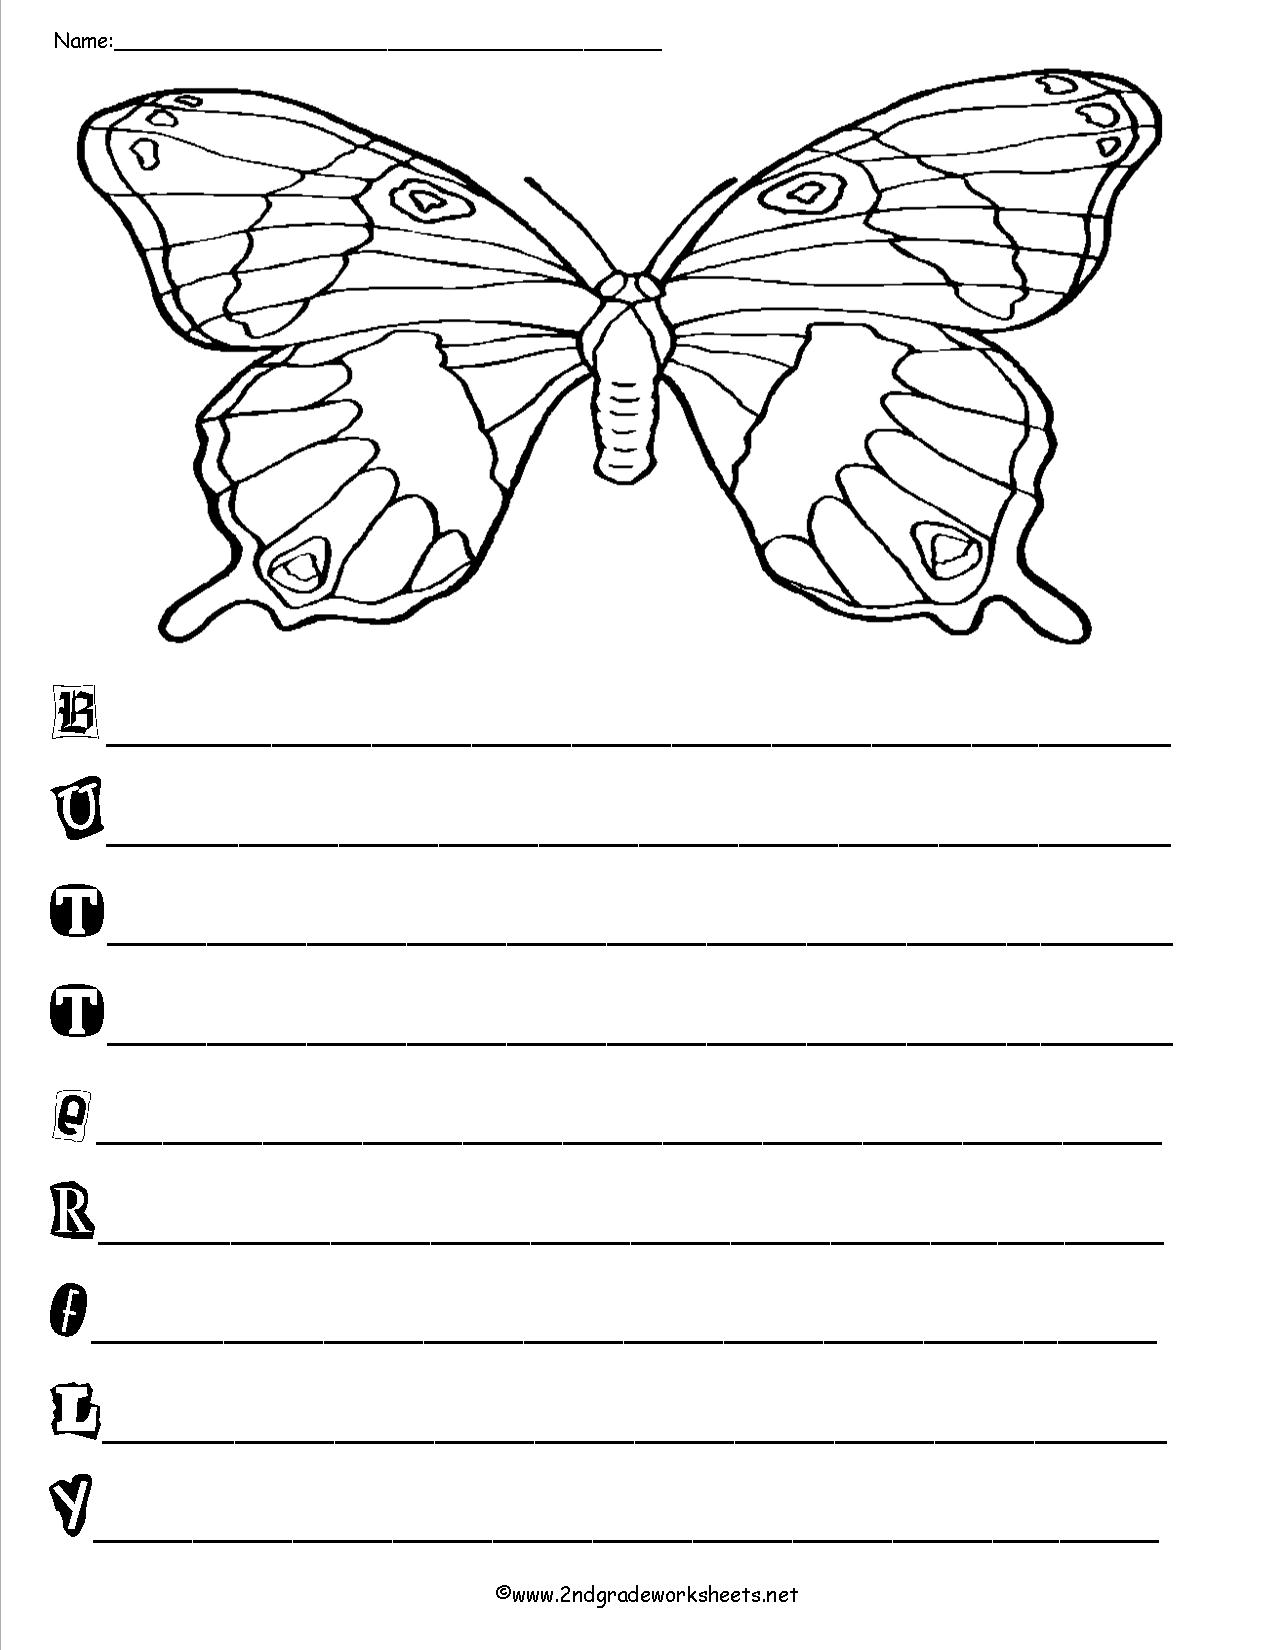 Acrostic Poem Forms Templates and Worksheets